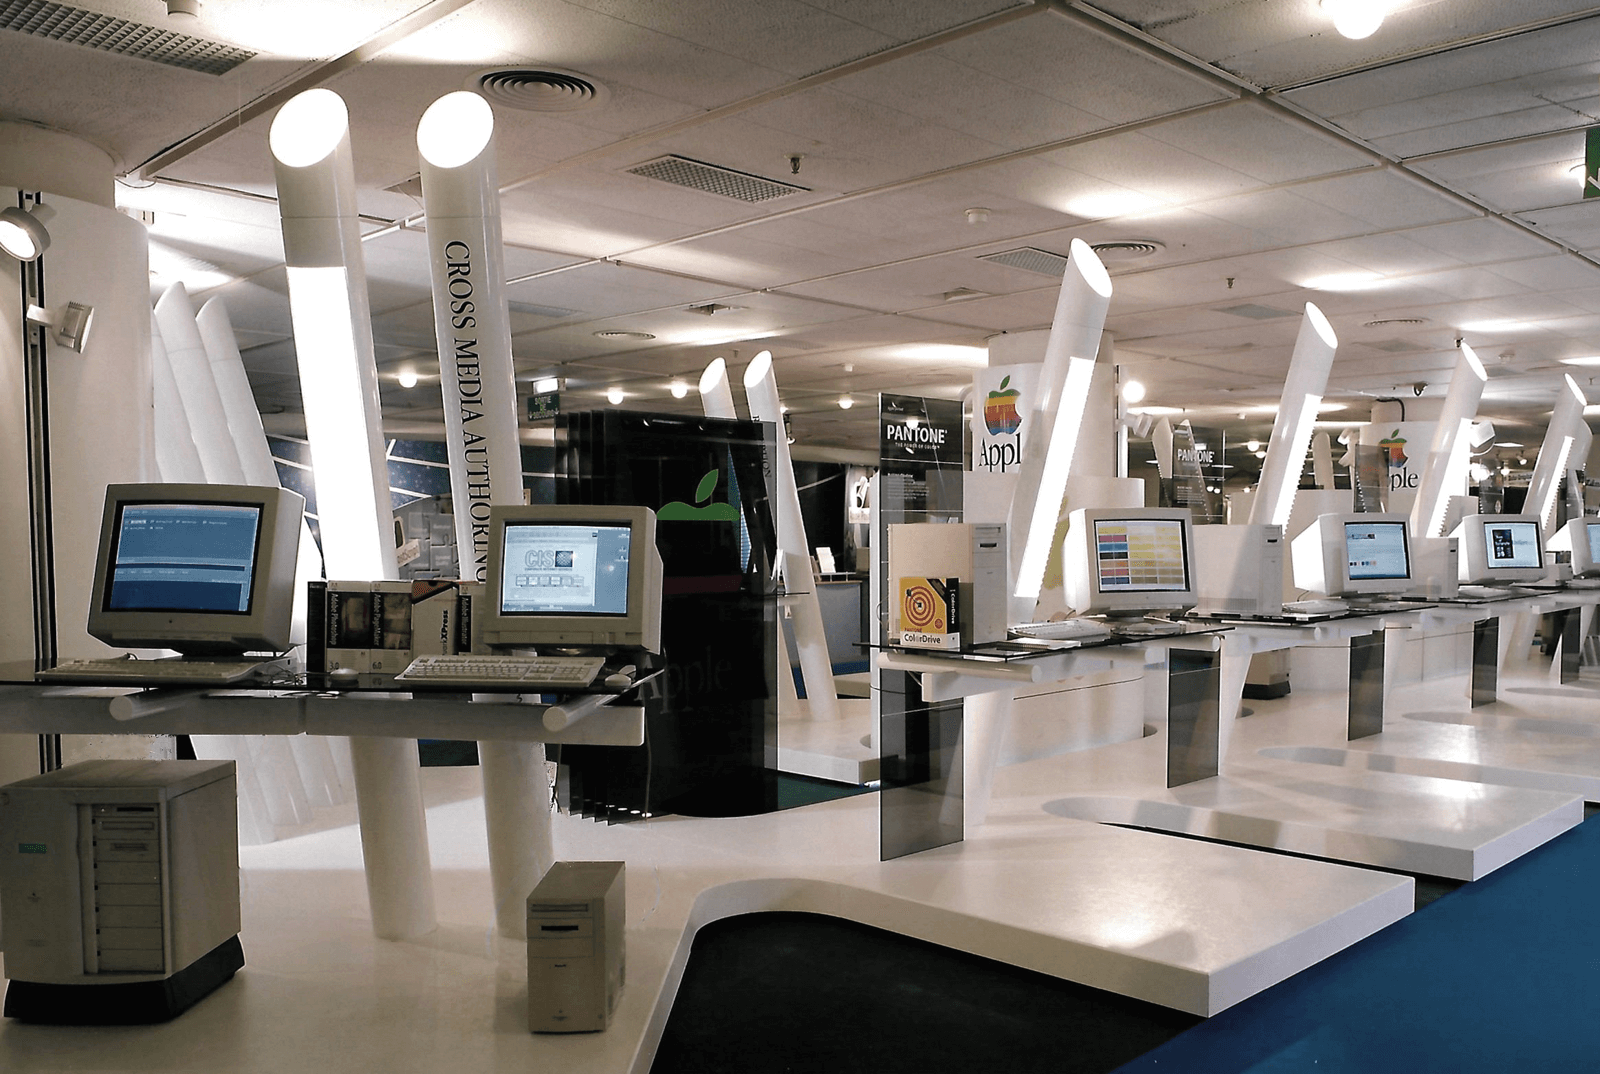 Apple computers exhibition in 2001